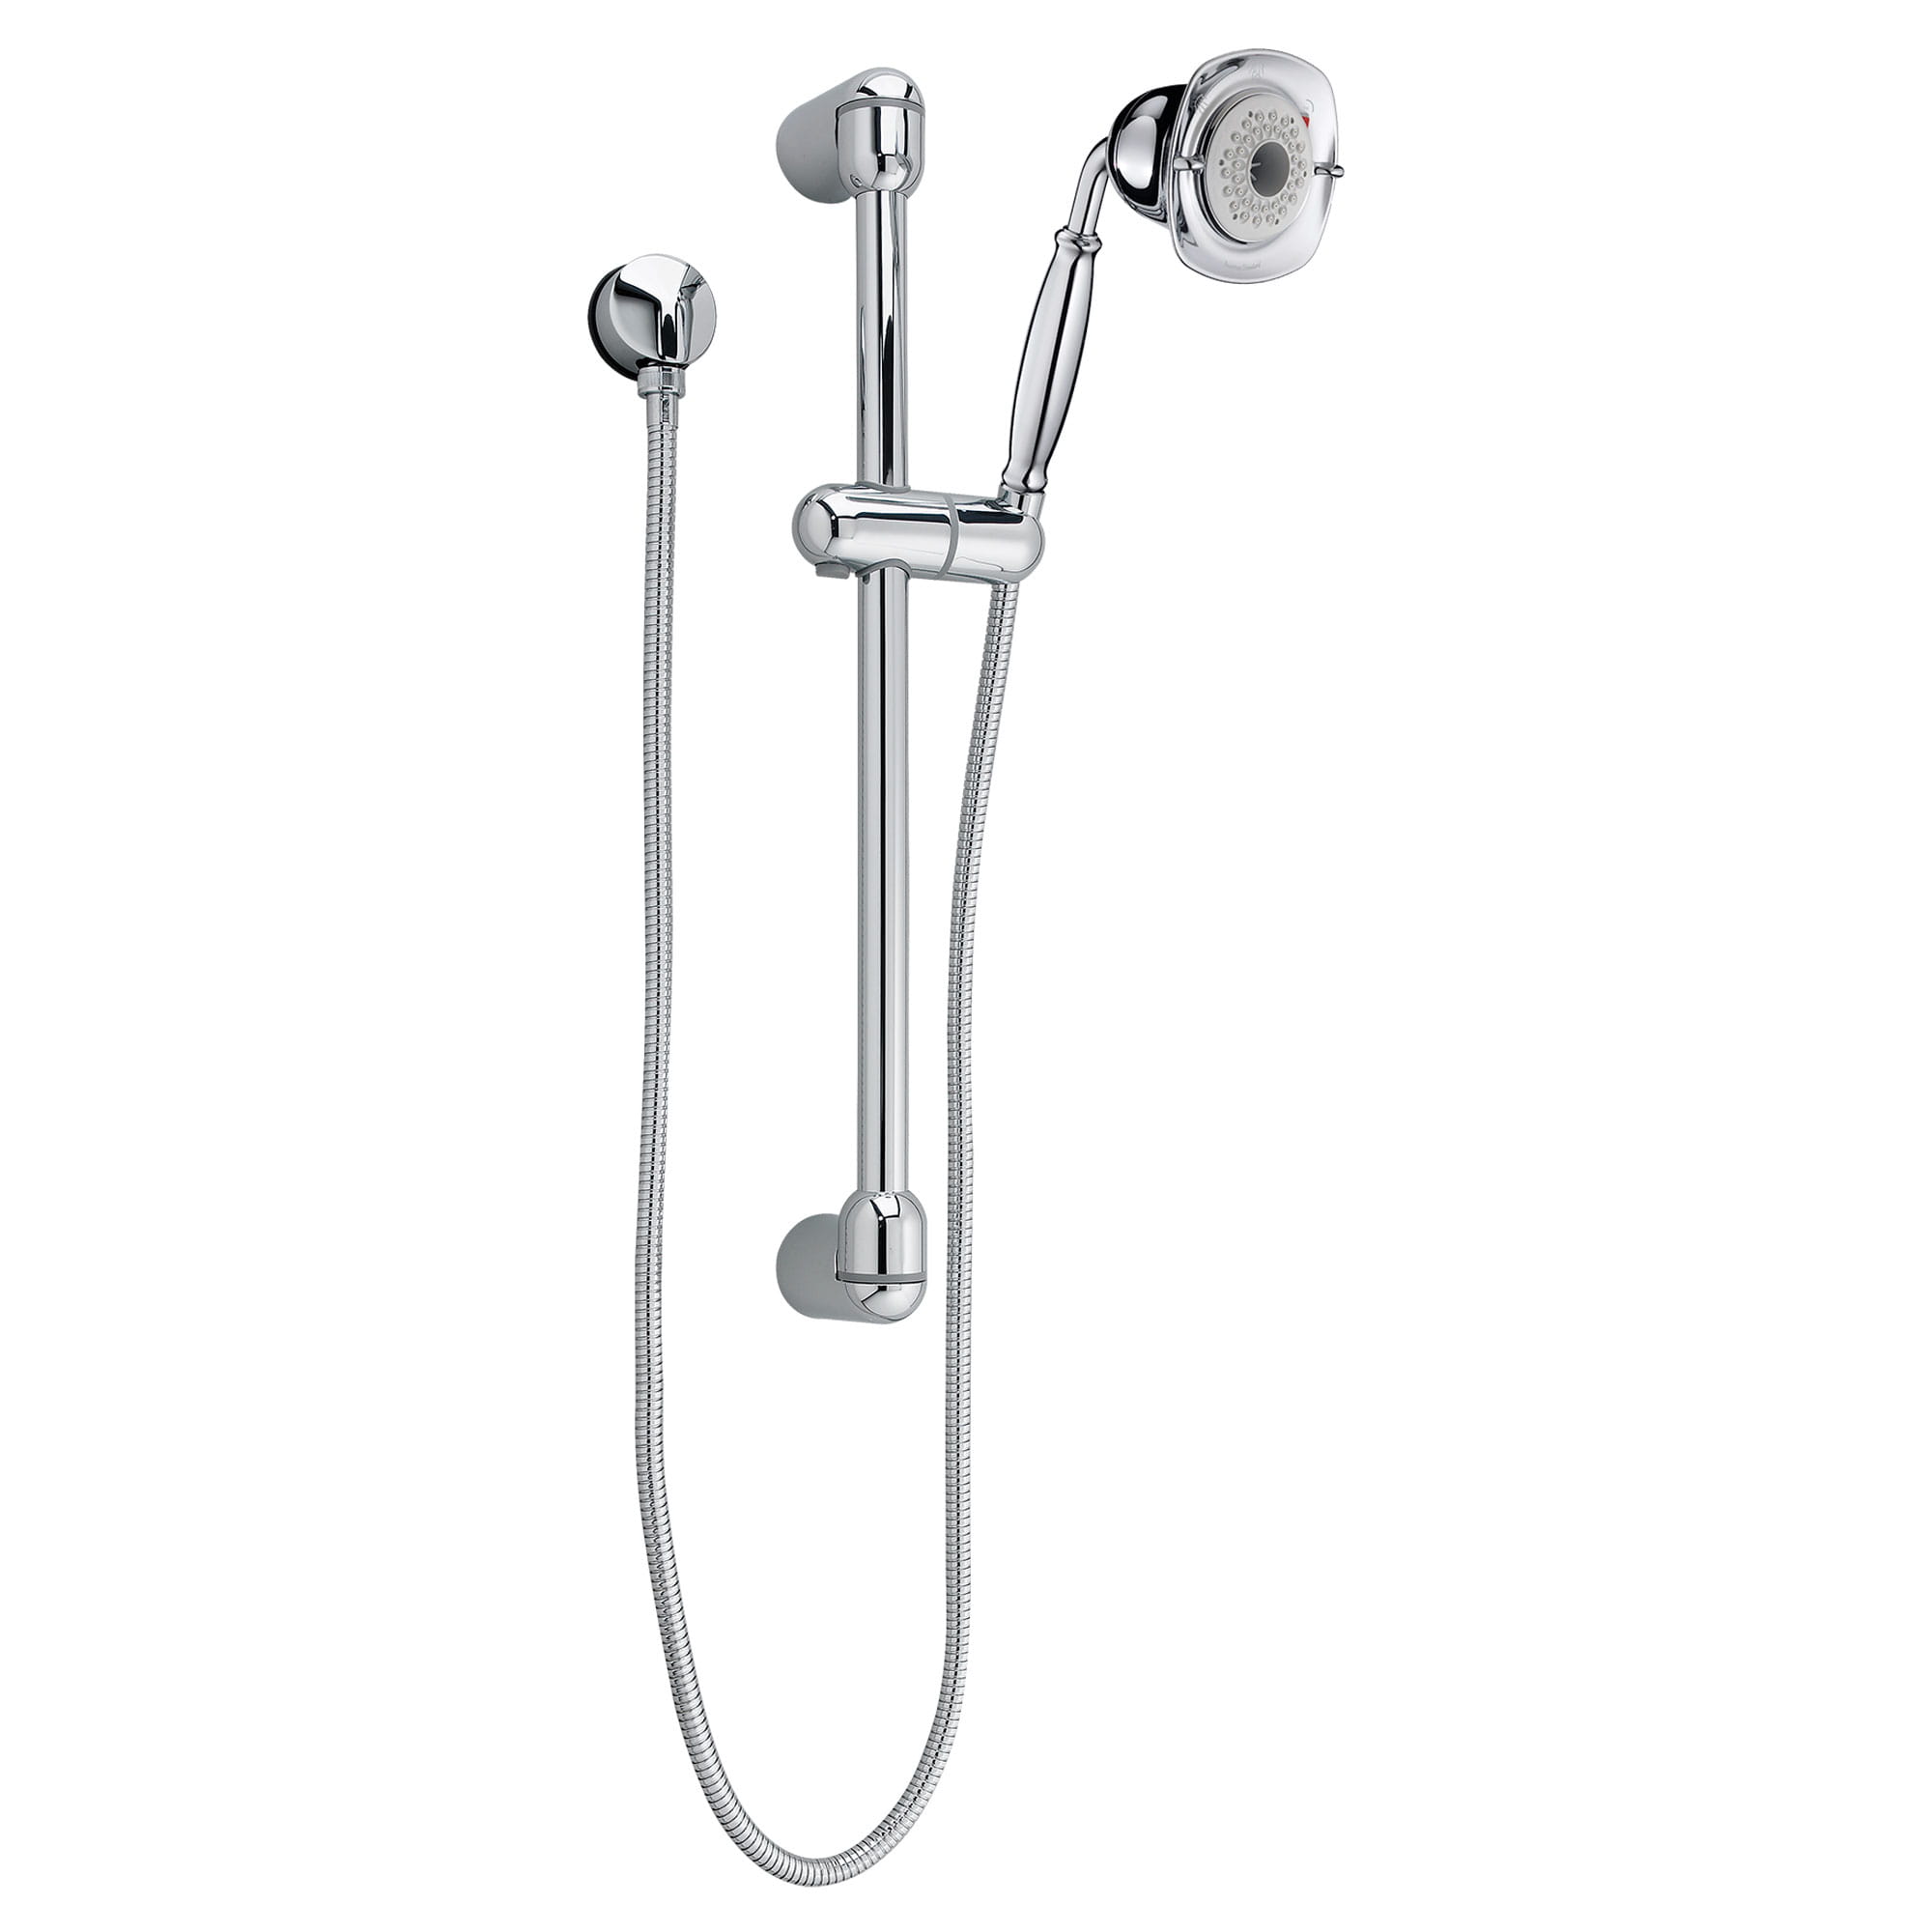 FloWise 25-In. 3-Function 2.0 GPM Shower System Kit